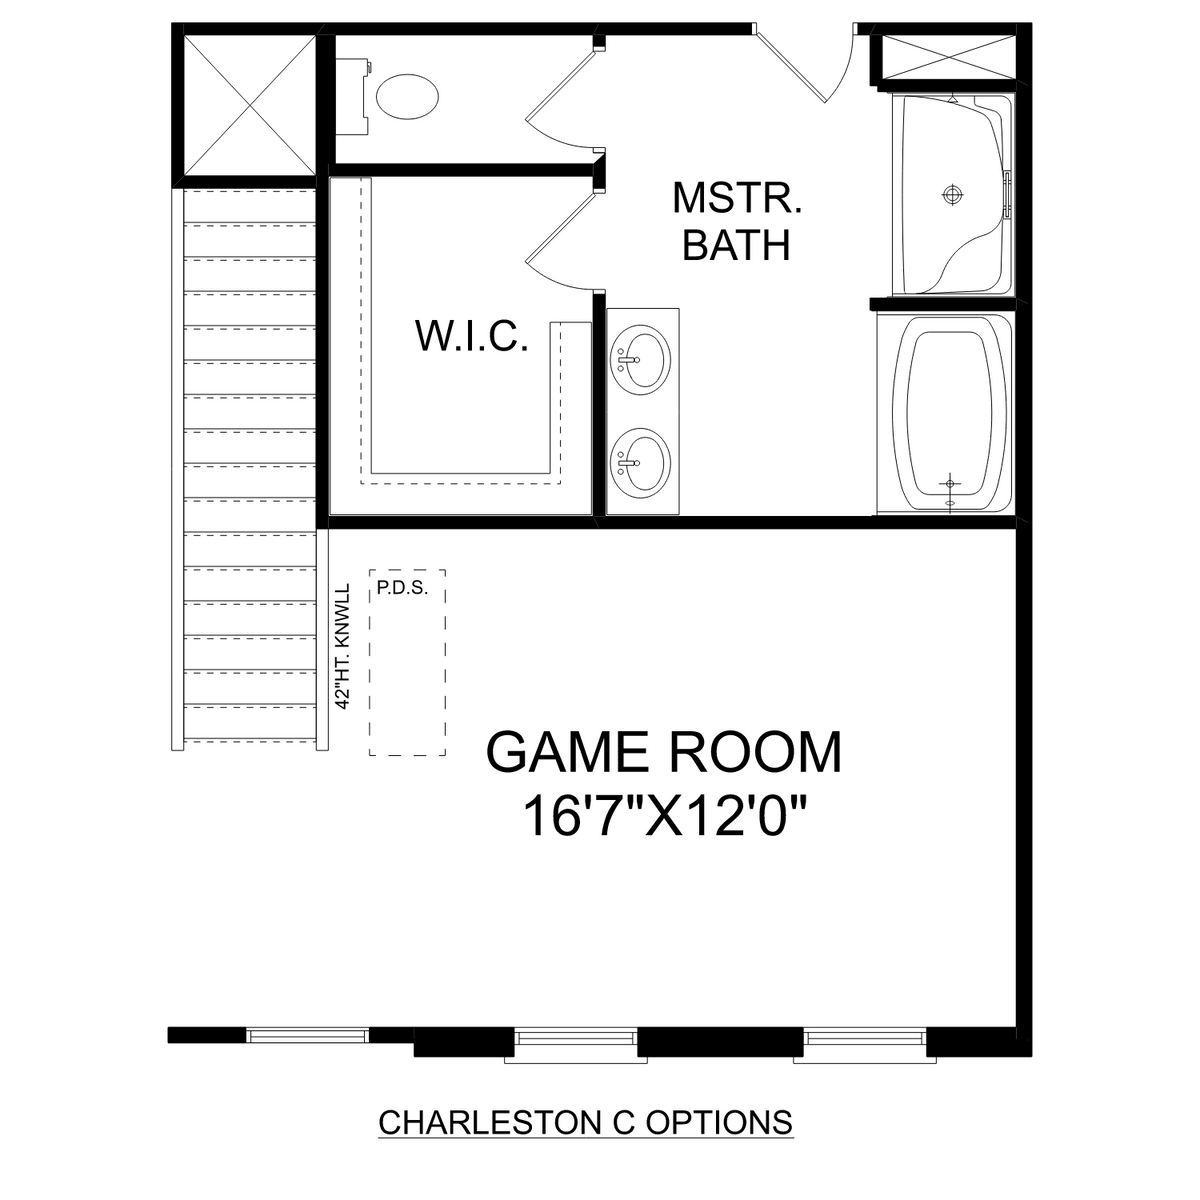 3 - The Charleston C buildable floor plan layout in Davidson Homes' Wood Trail community.